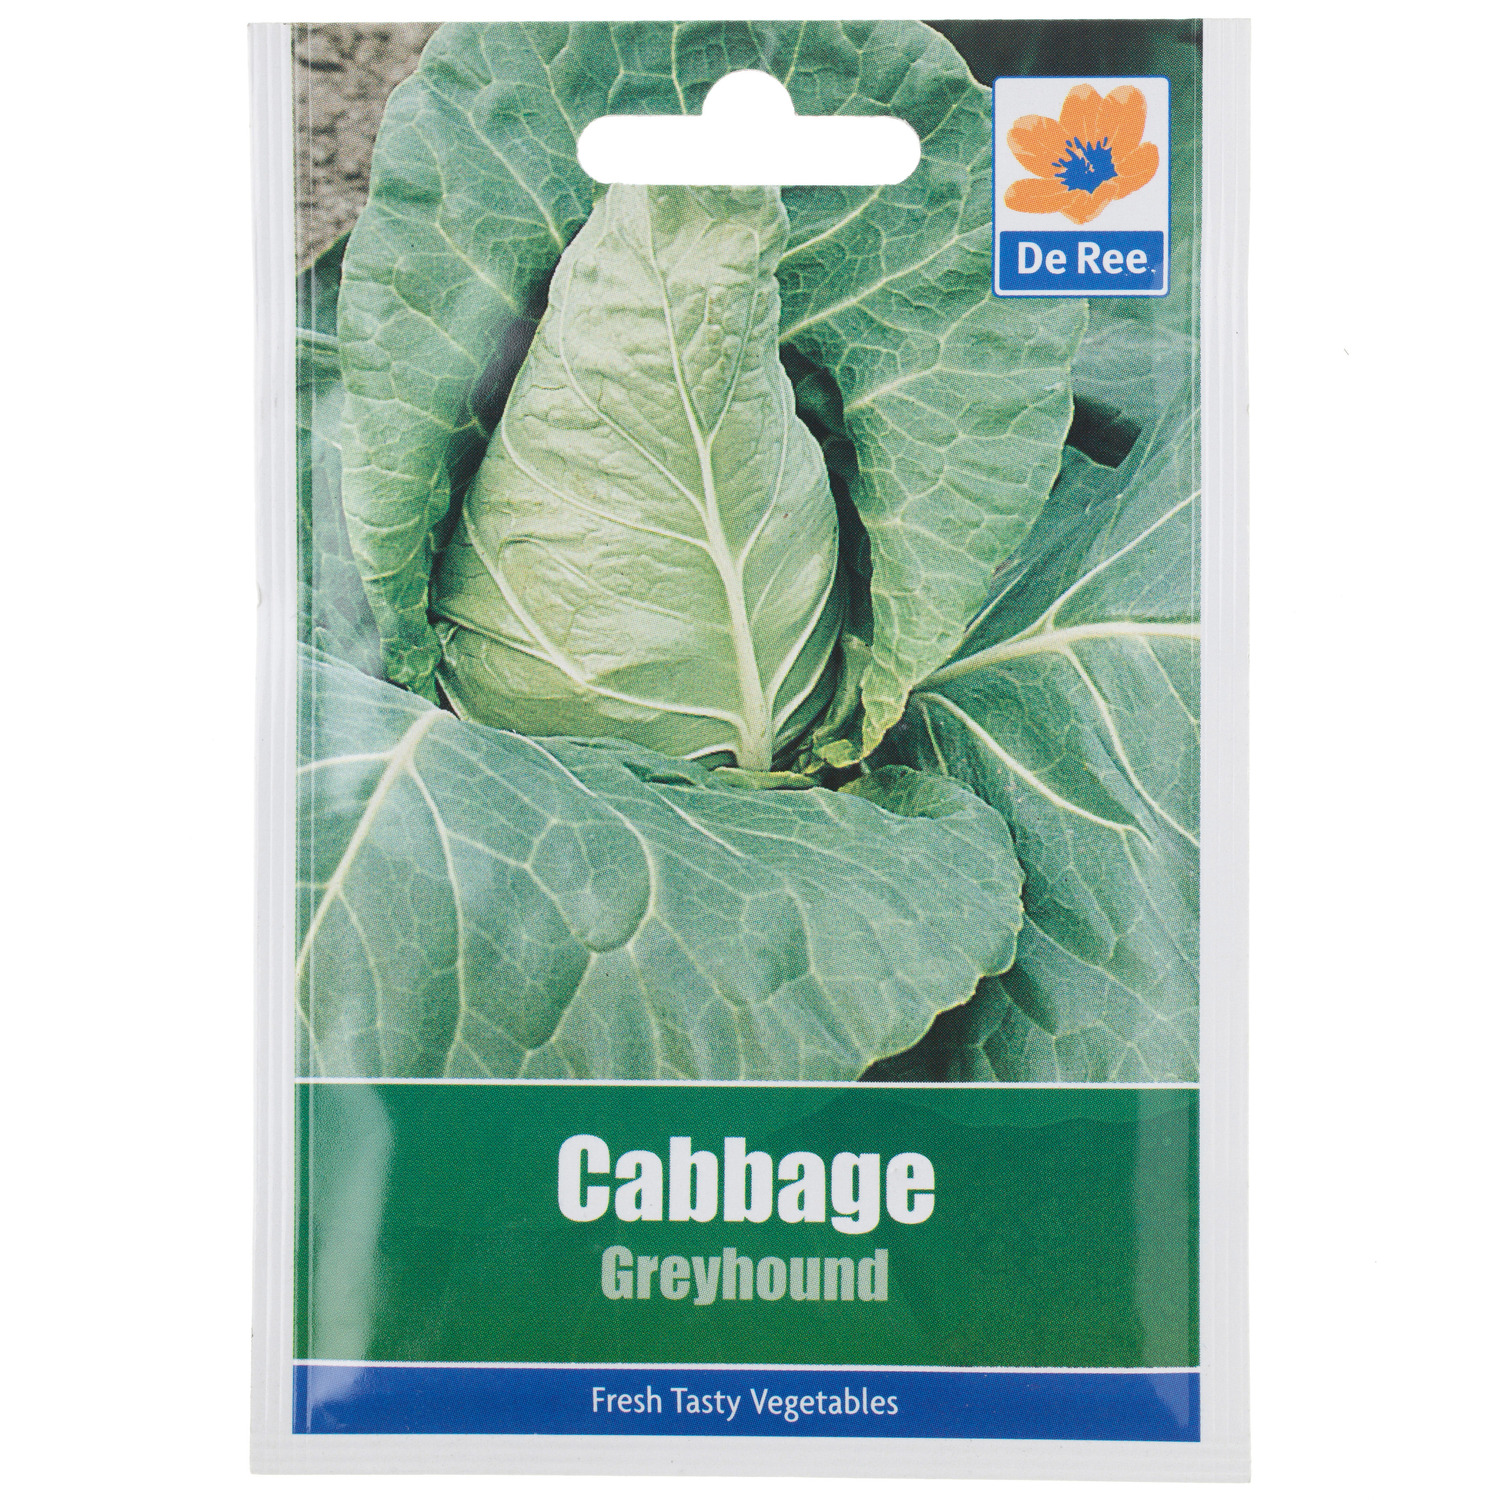 Cabbage Greyhound Seed Packet Image